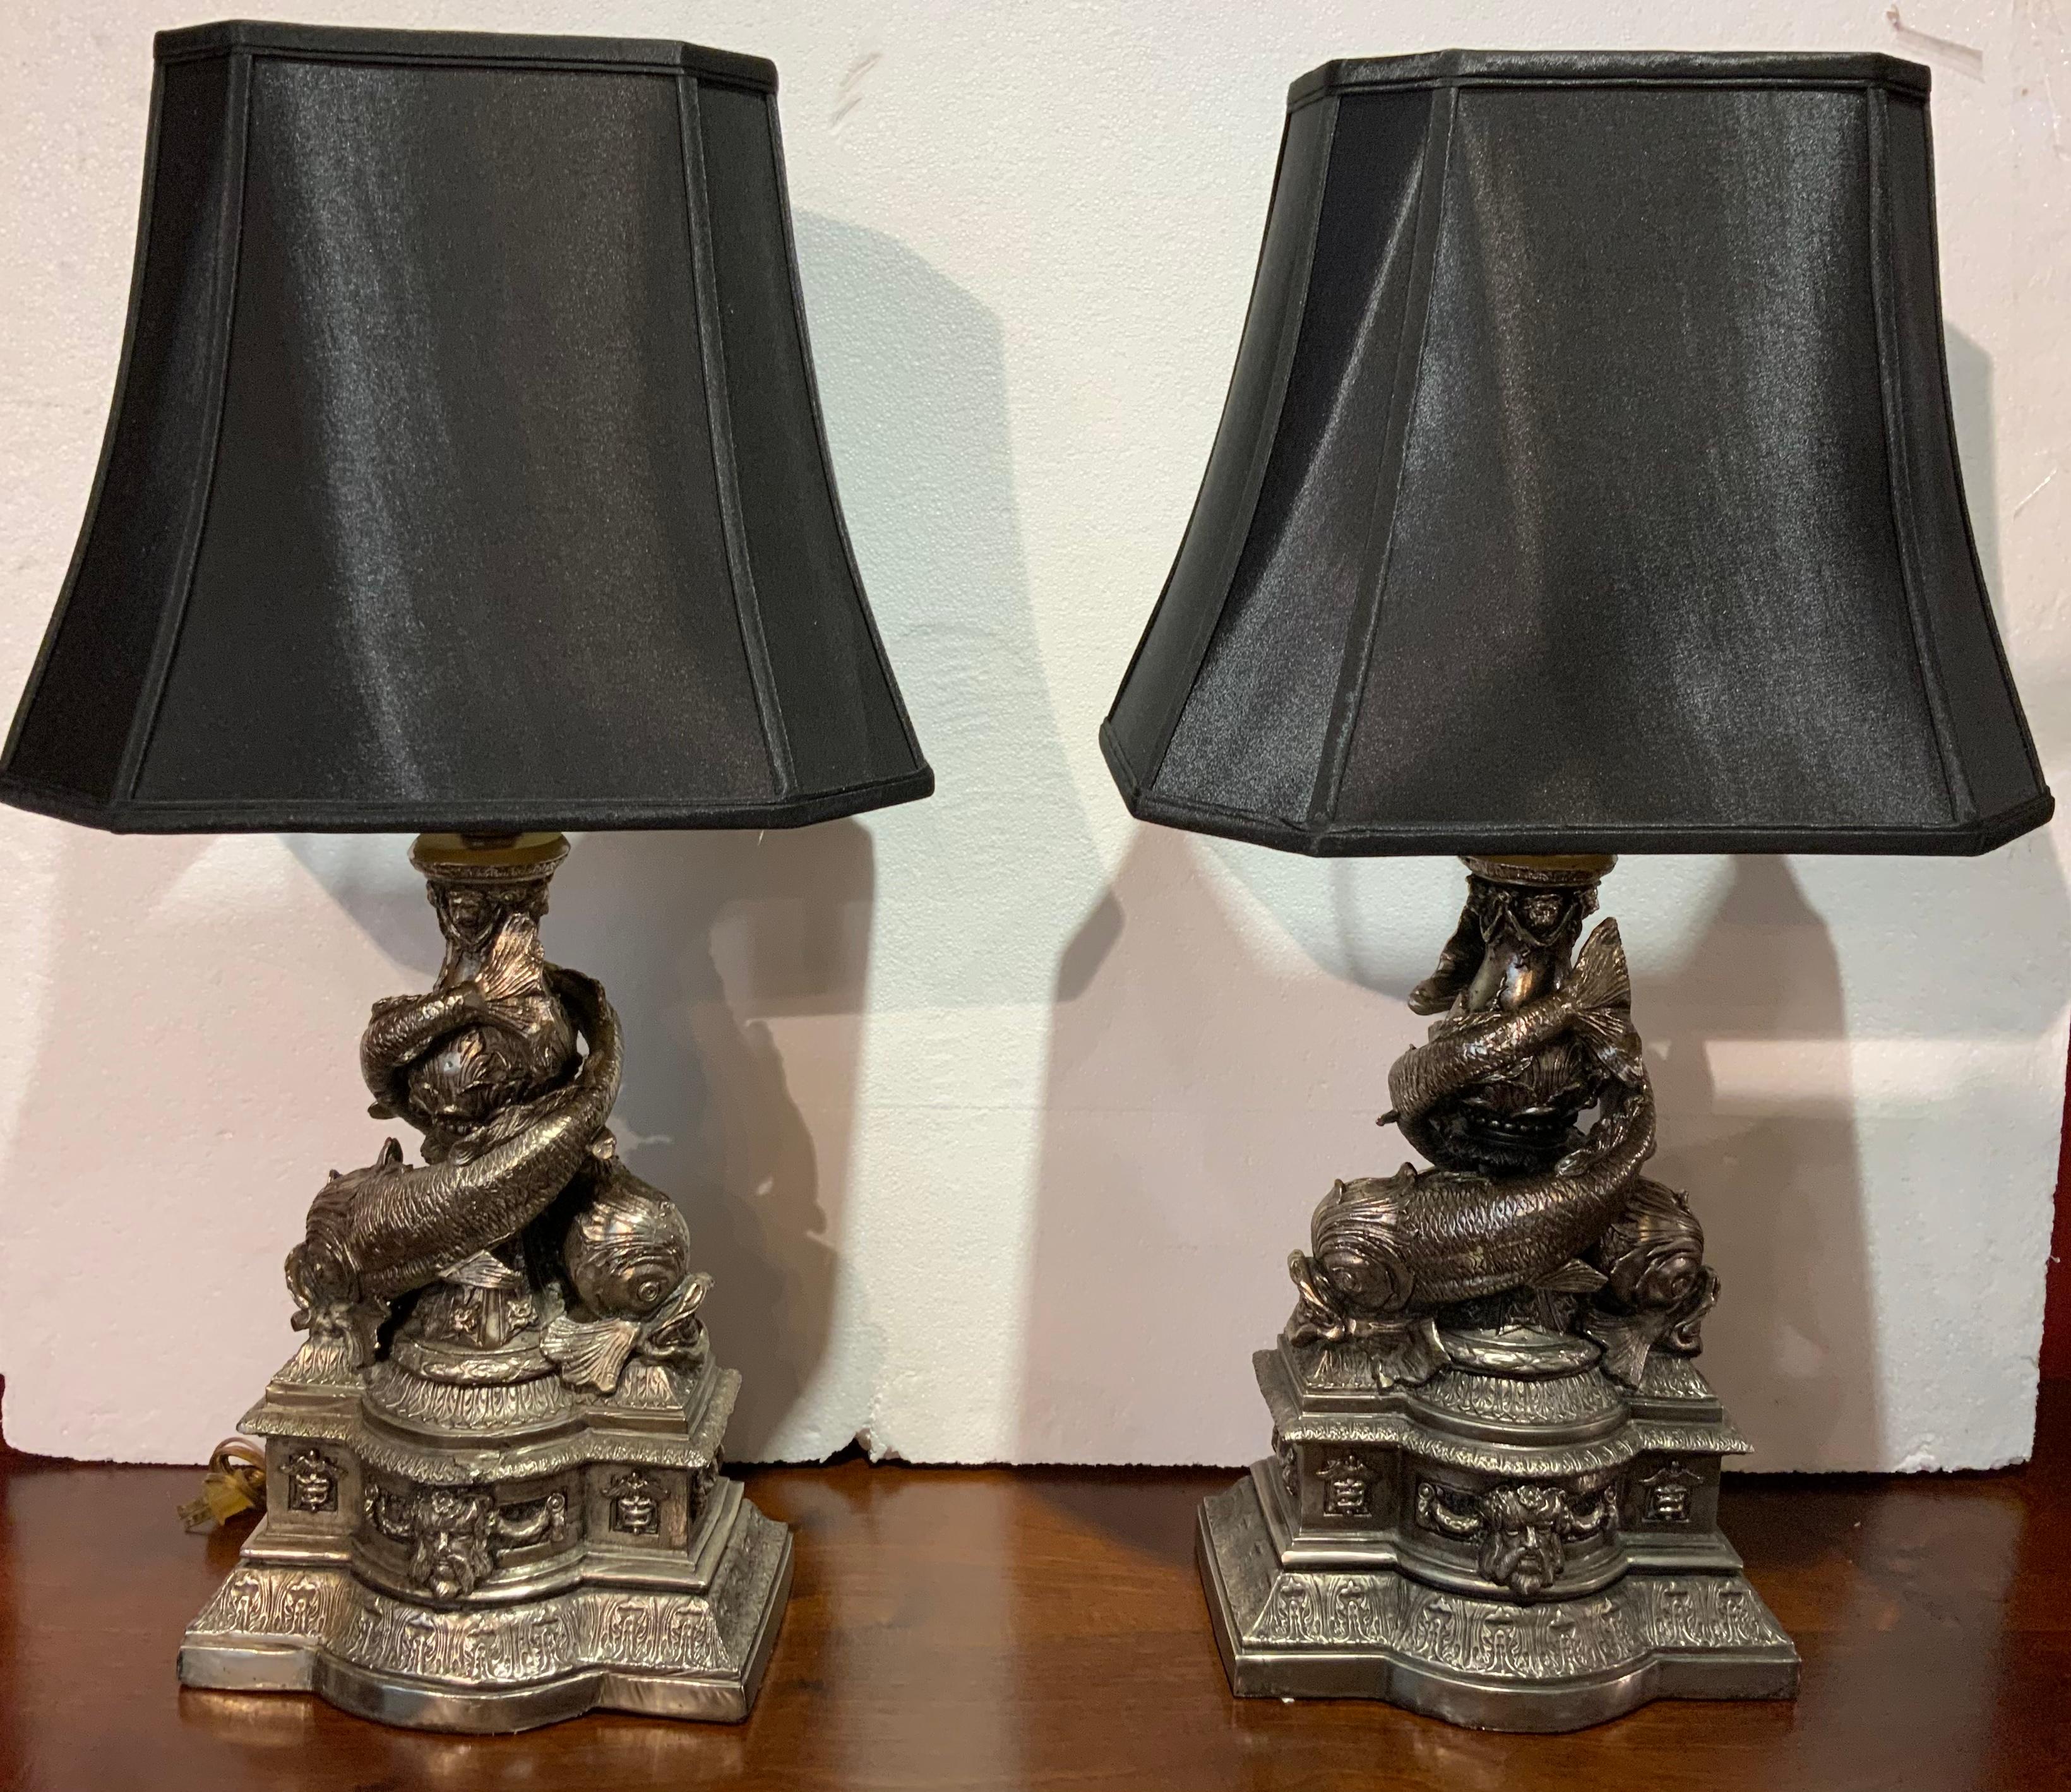 The molding on these pieces is fine quality work in the shape of intertwined 
Dolphins with bases decorated with masques and caducei, resting on
Ogden bases molded with acanthus leaves, mounted with shades. The
Color is in a muted pewter metal